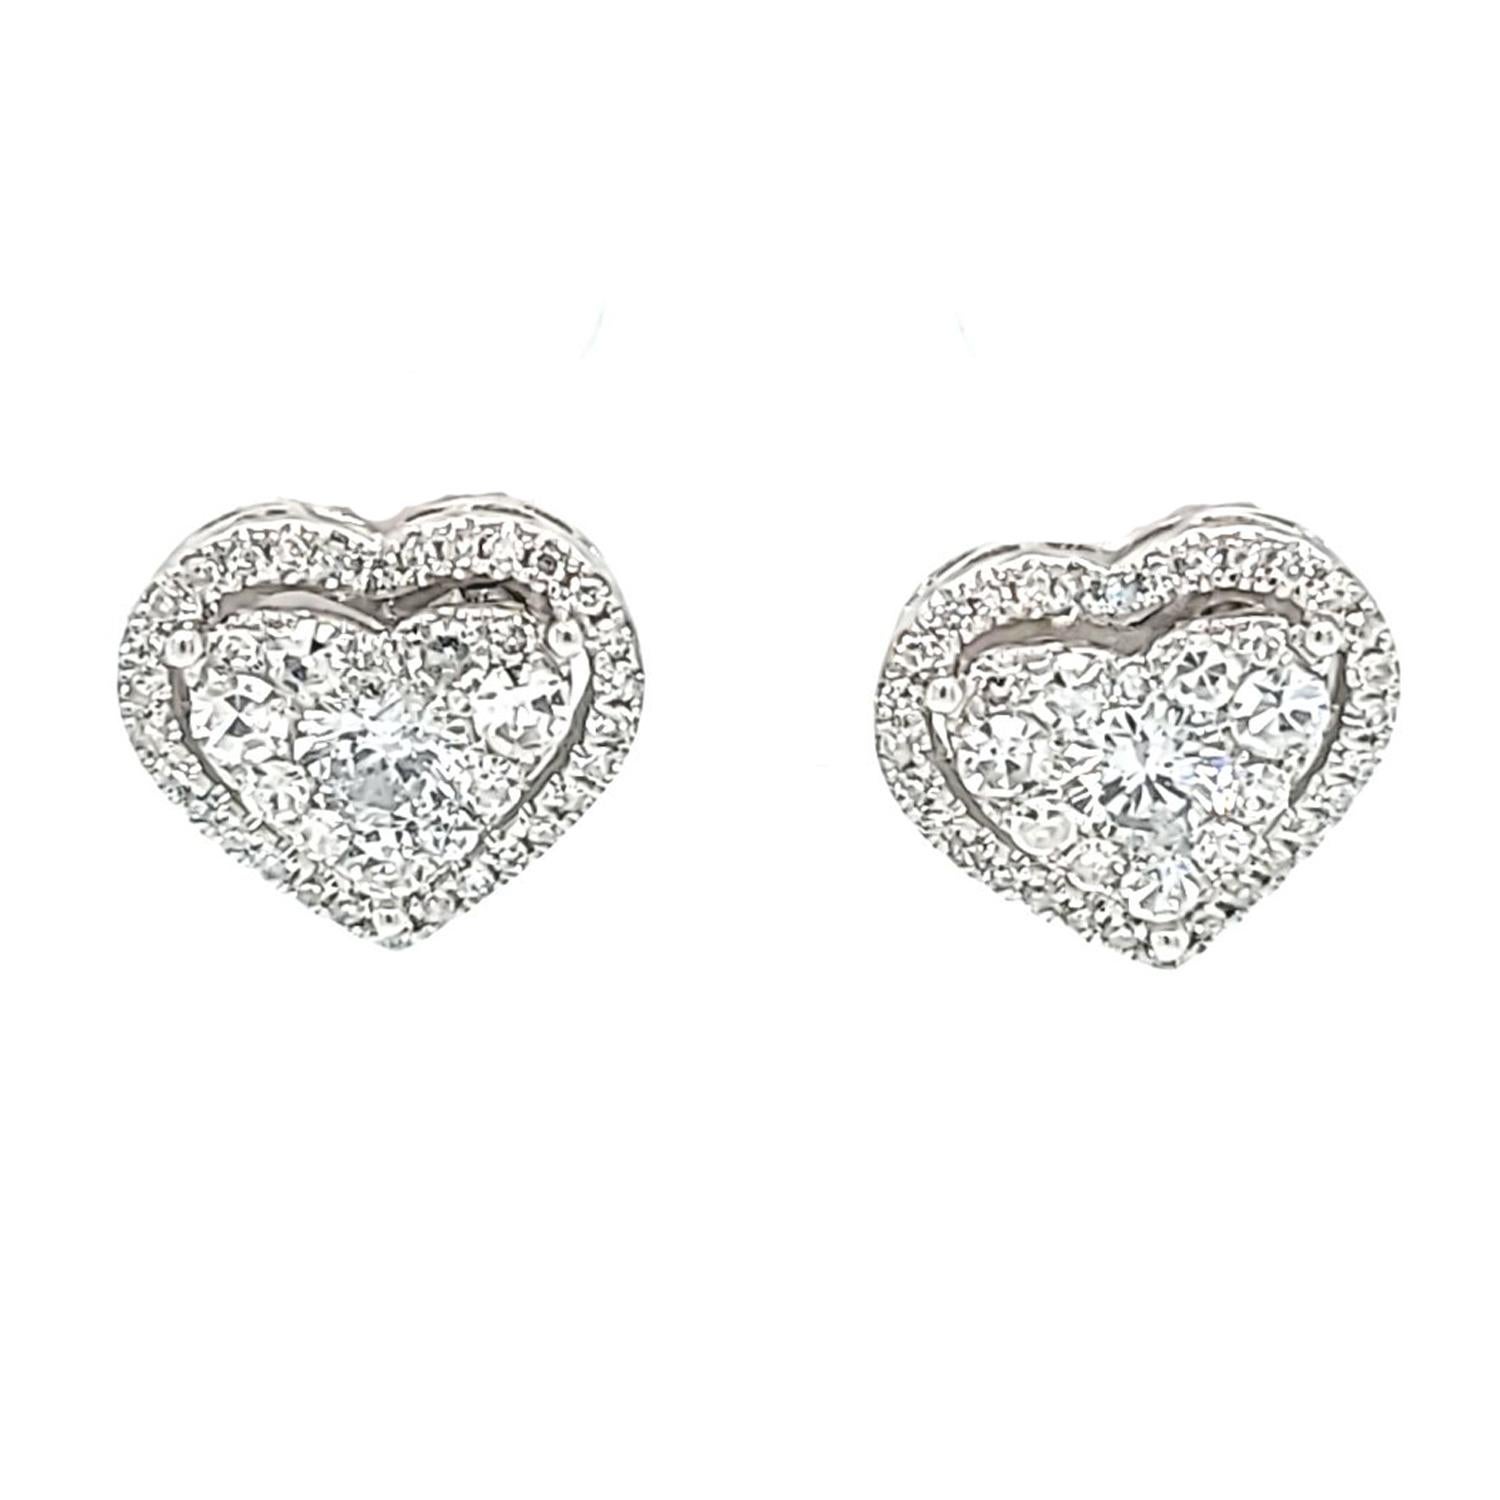 Diamond Heart Stud Earrings In Good Condition For Sale In Coral Gables, FL